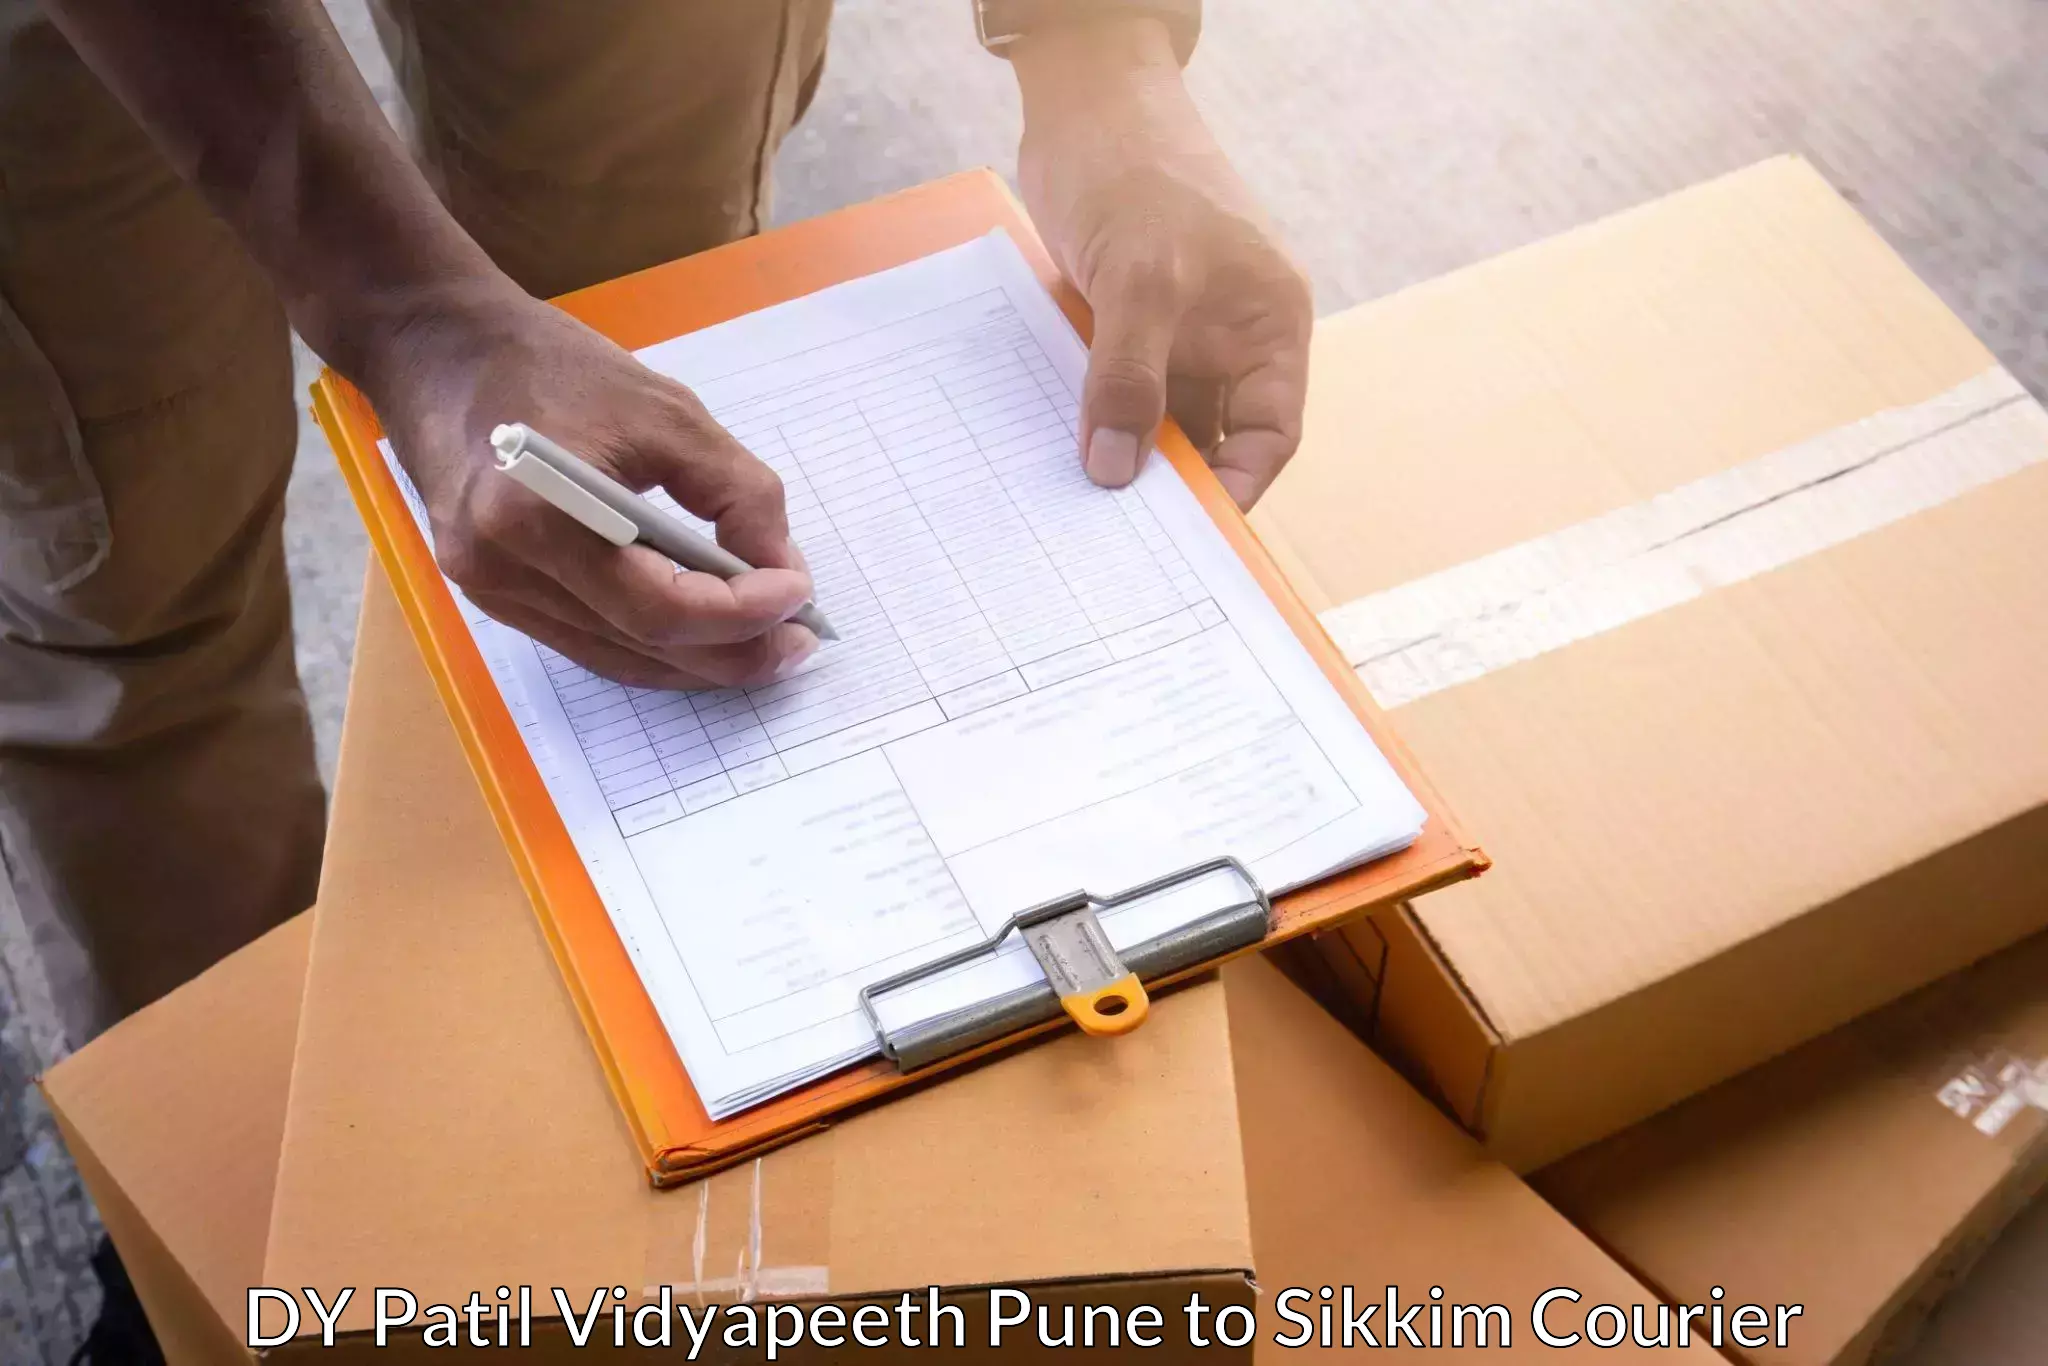 Express courier capabilities DY Patil Vidyapeeth Pune to Namchi